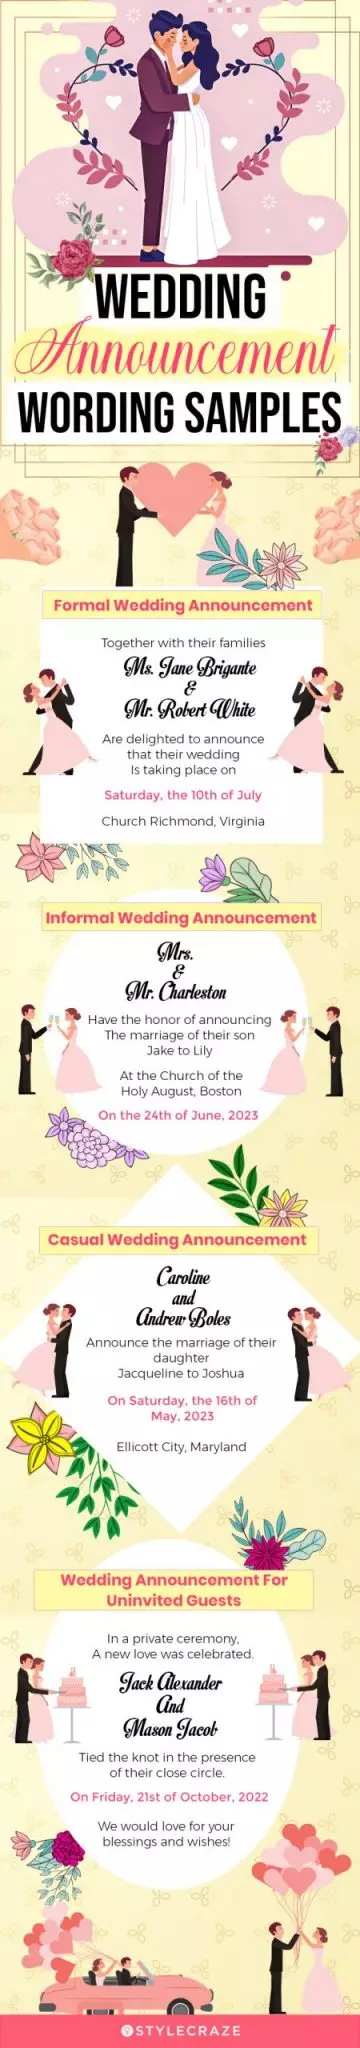 wedding announcement wording samples (infographic)